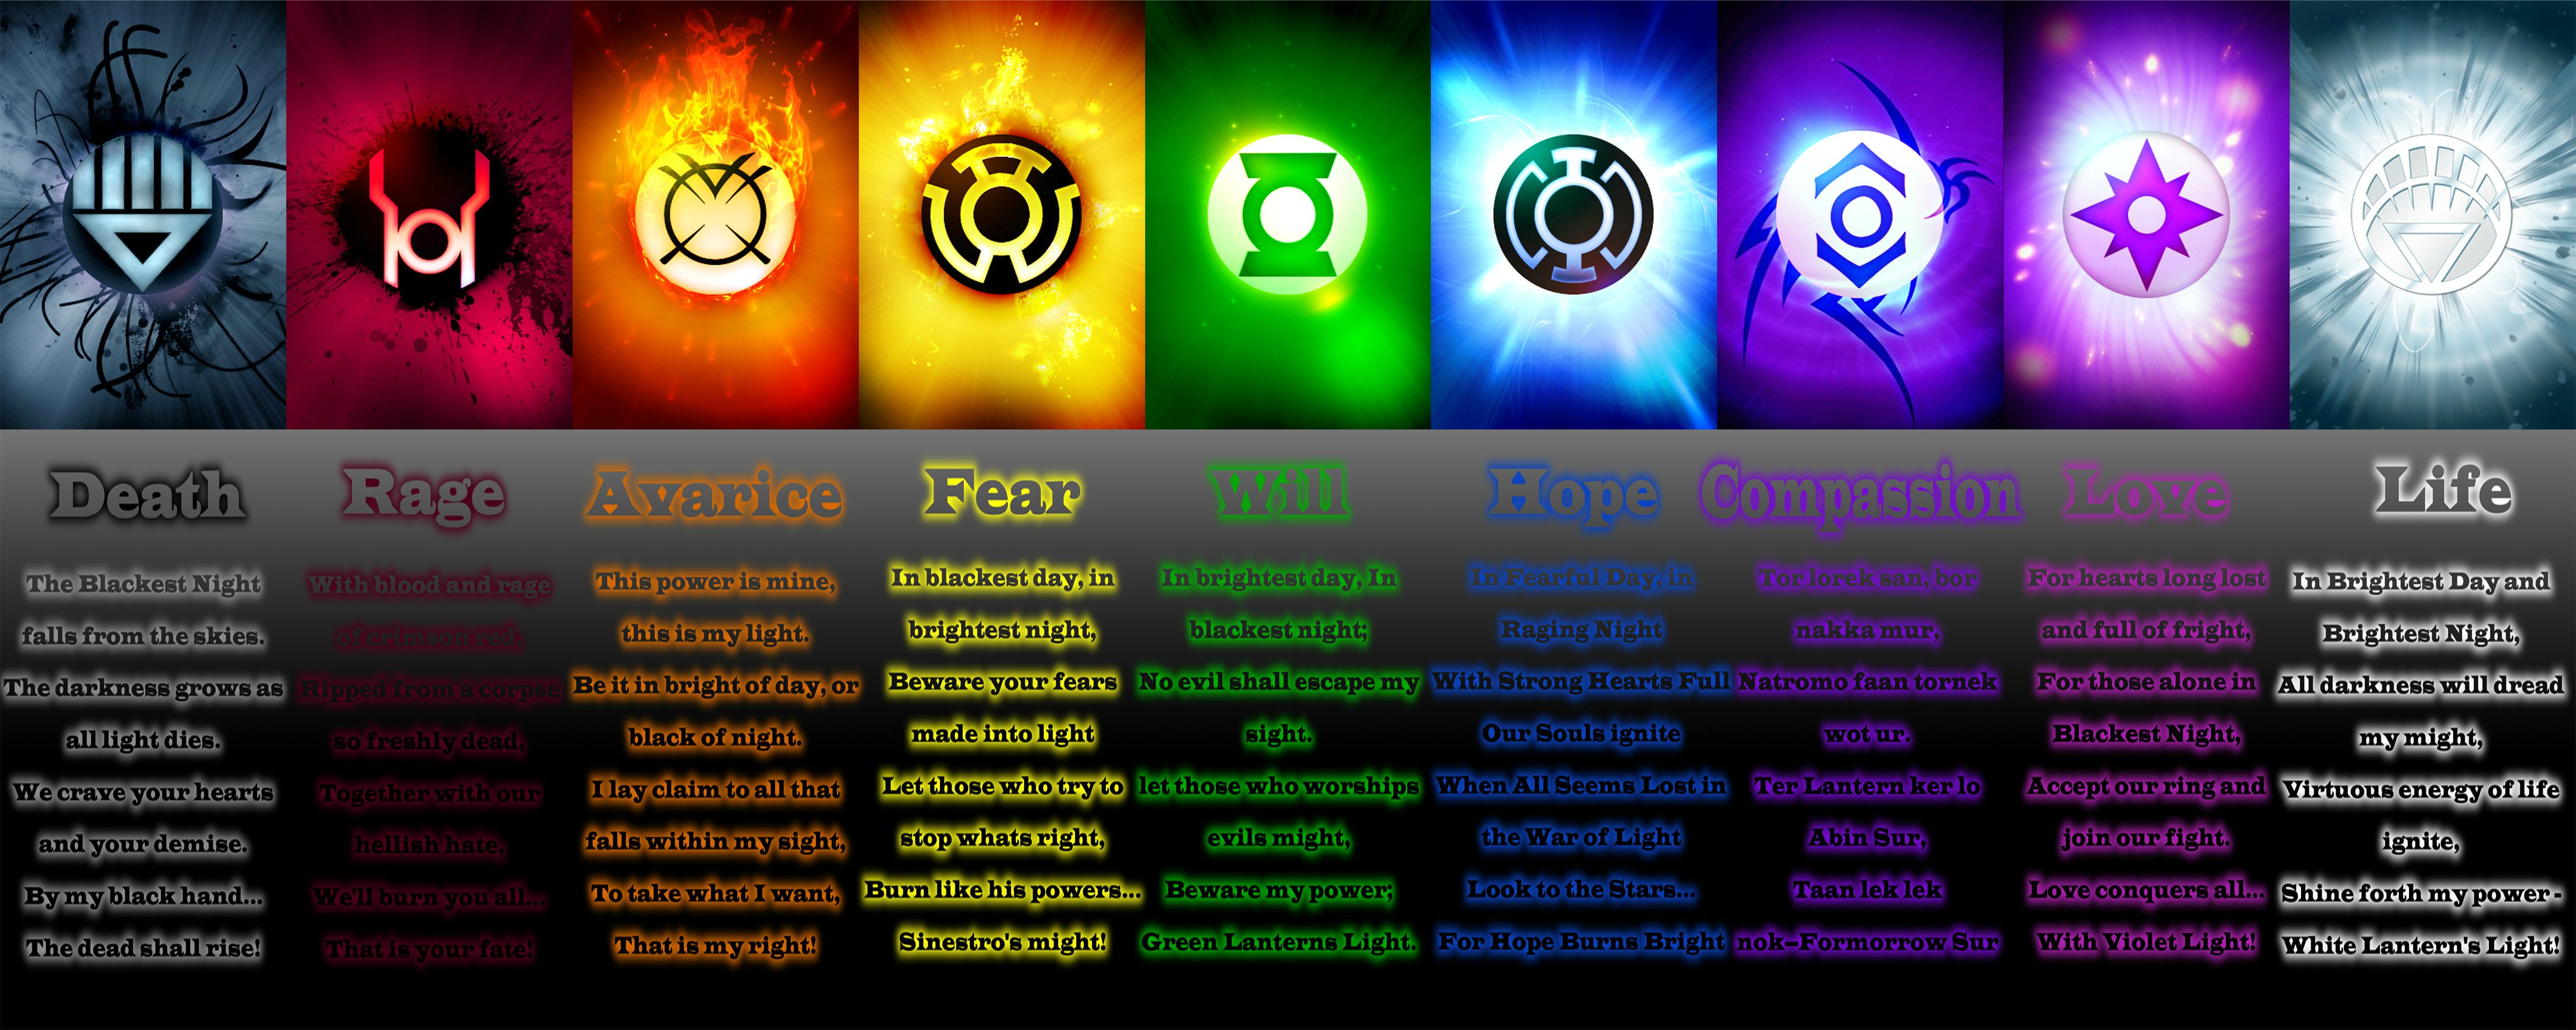 All 9 Lantern Corps Oaths HD Walls Find Wallpapers